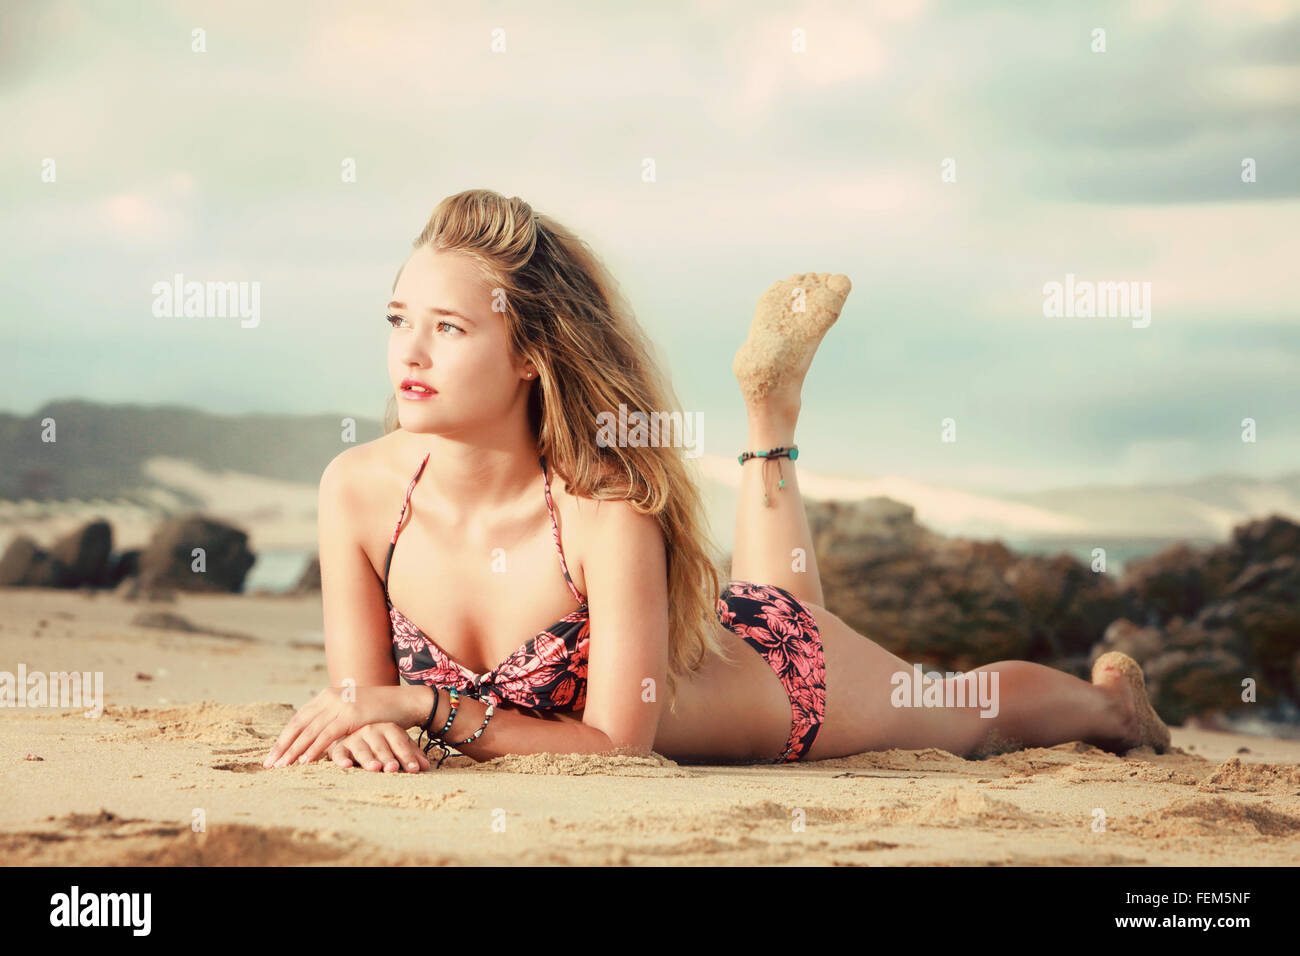 Young Woman Outdoor In Bikini Panties Stock Photo, Picture and Royalty Free  Image. Image 17219857.